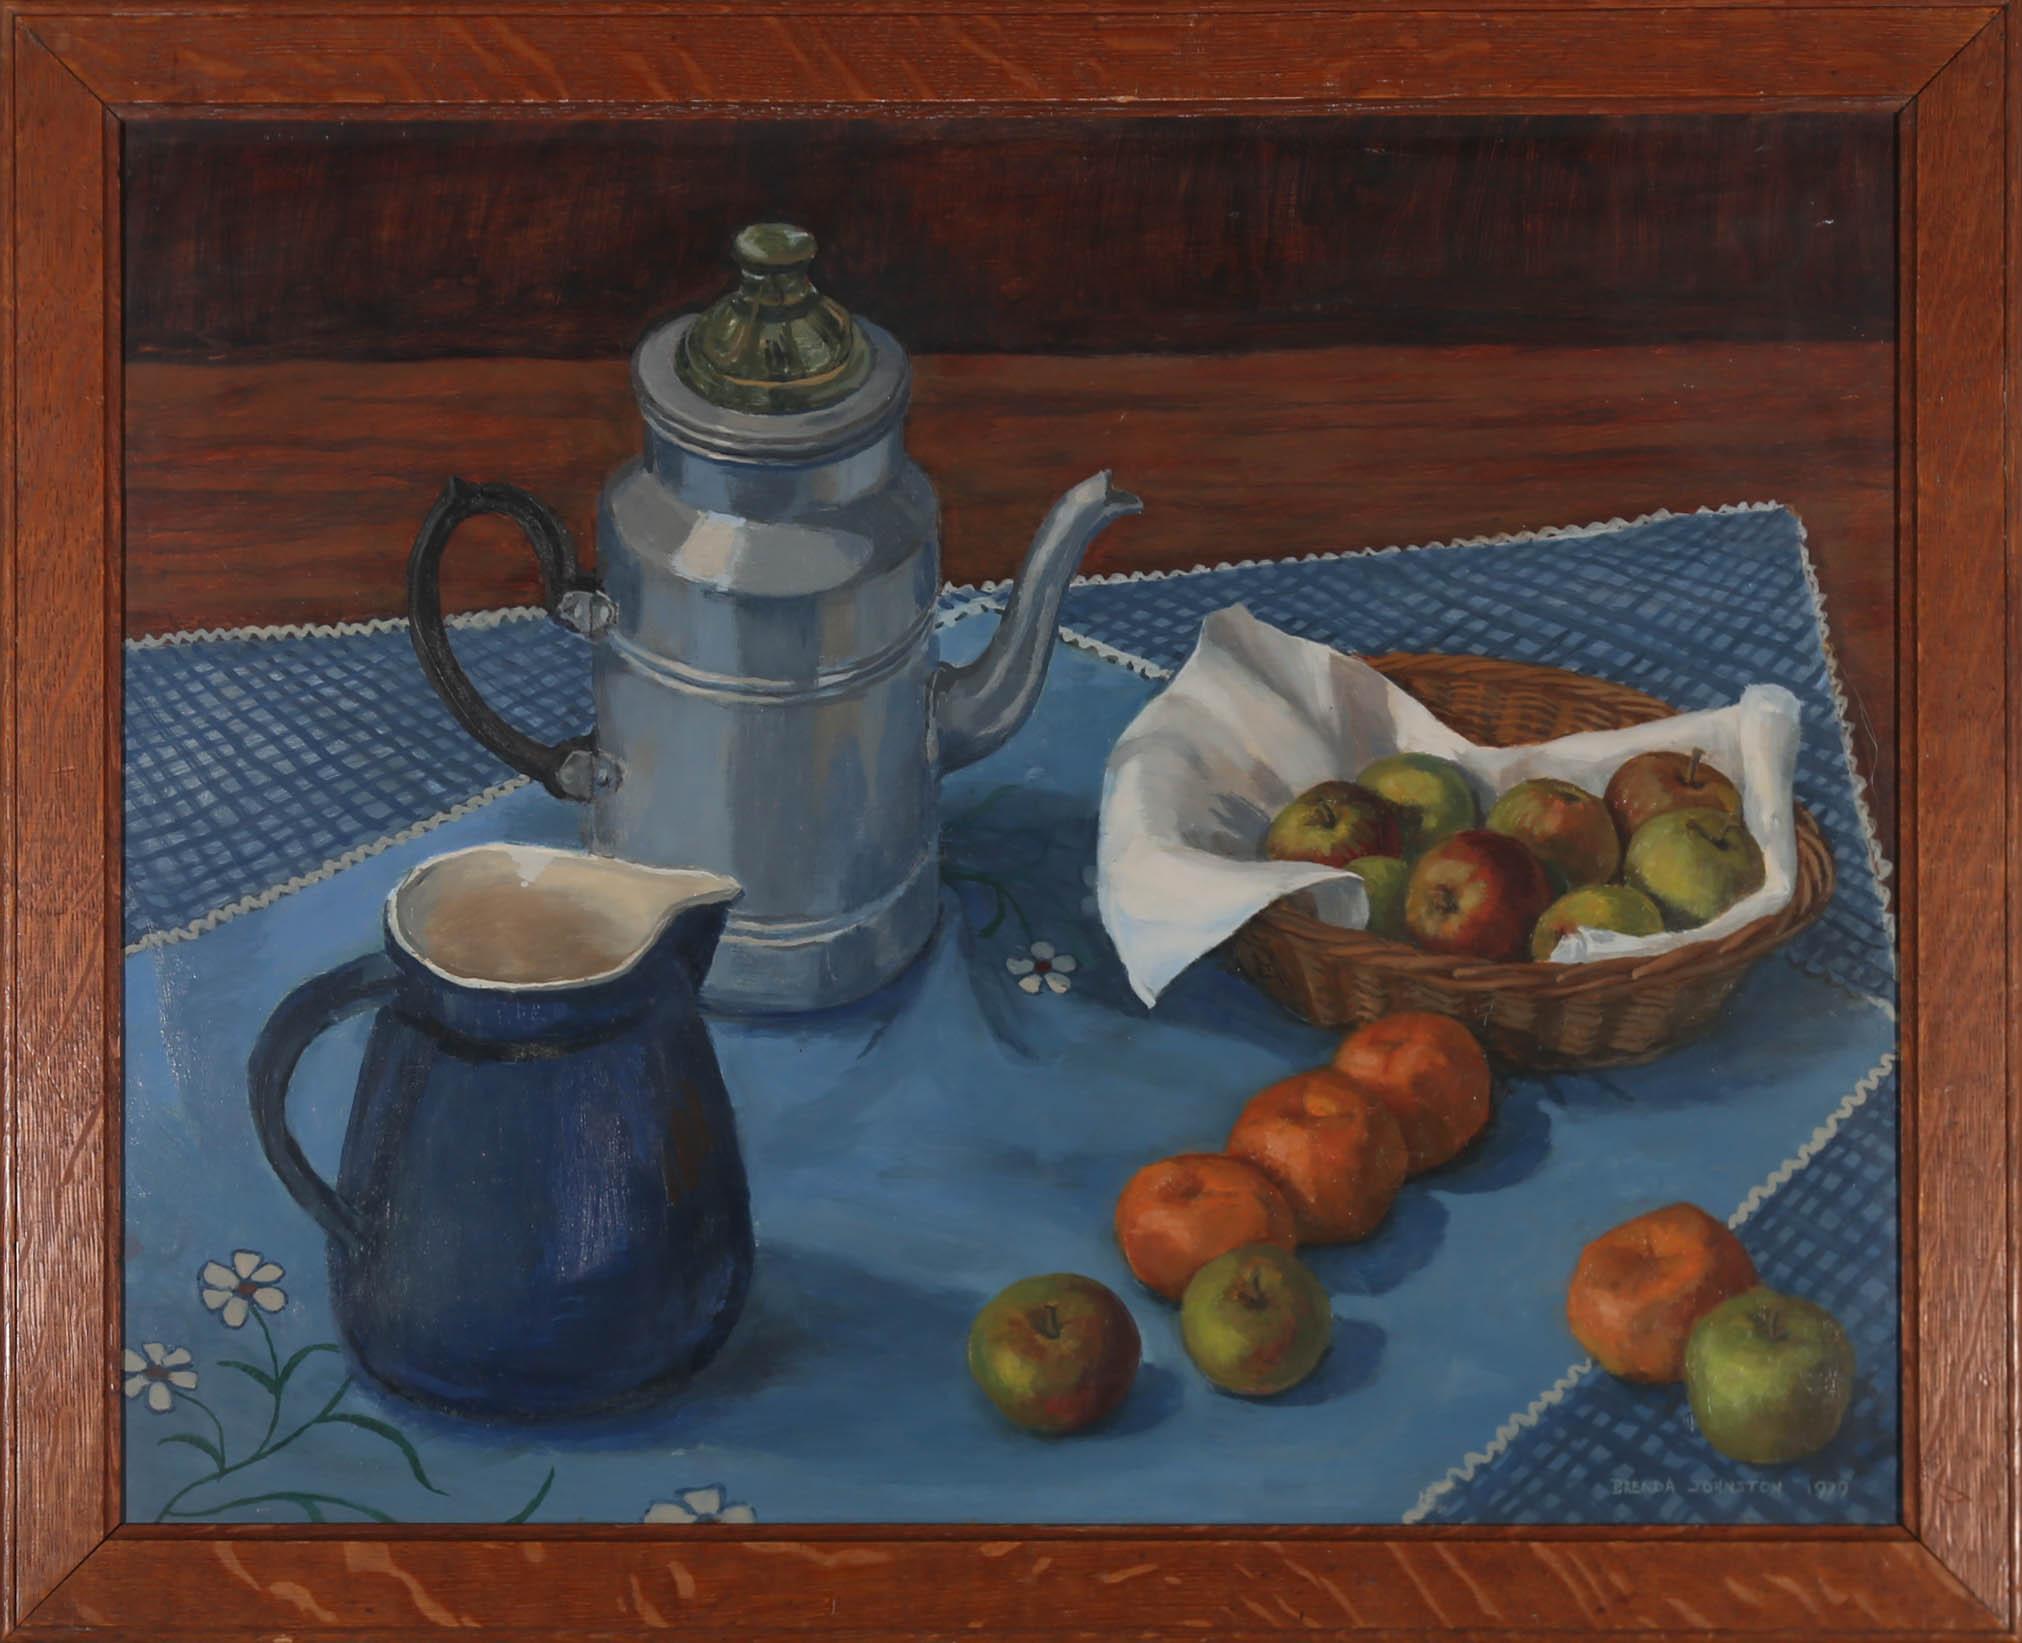 A truly wonderful still life study by the British artist Brenda Johnston. Here she's captured a quaint little set-up with a blue ceramic milk jug, tin kettle and fruit bowl. The embroidered tablecloth is expertly painted with delightful areas of